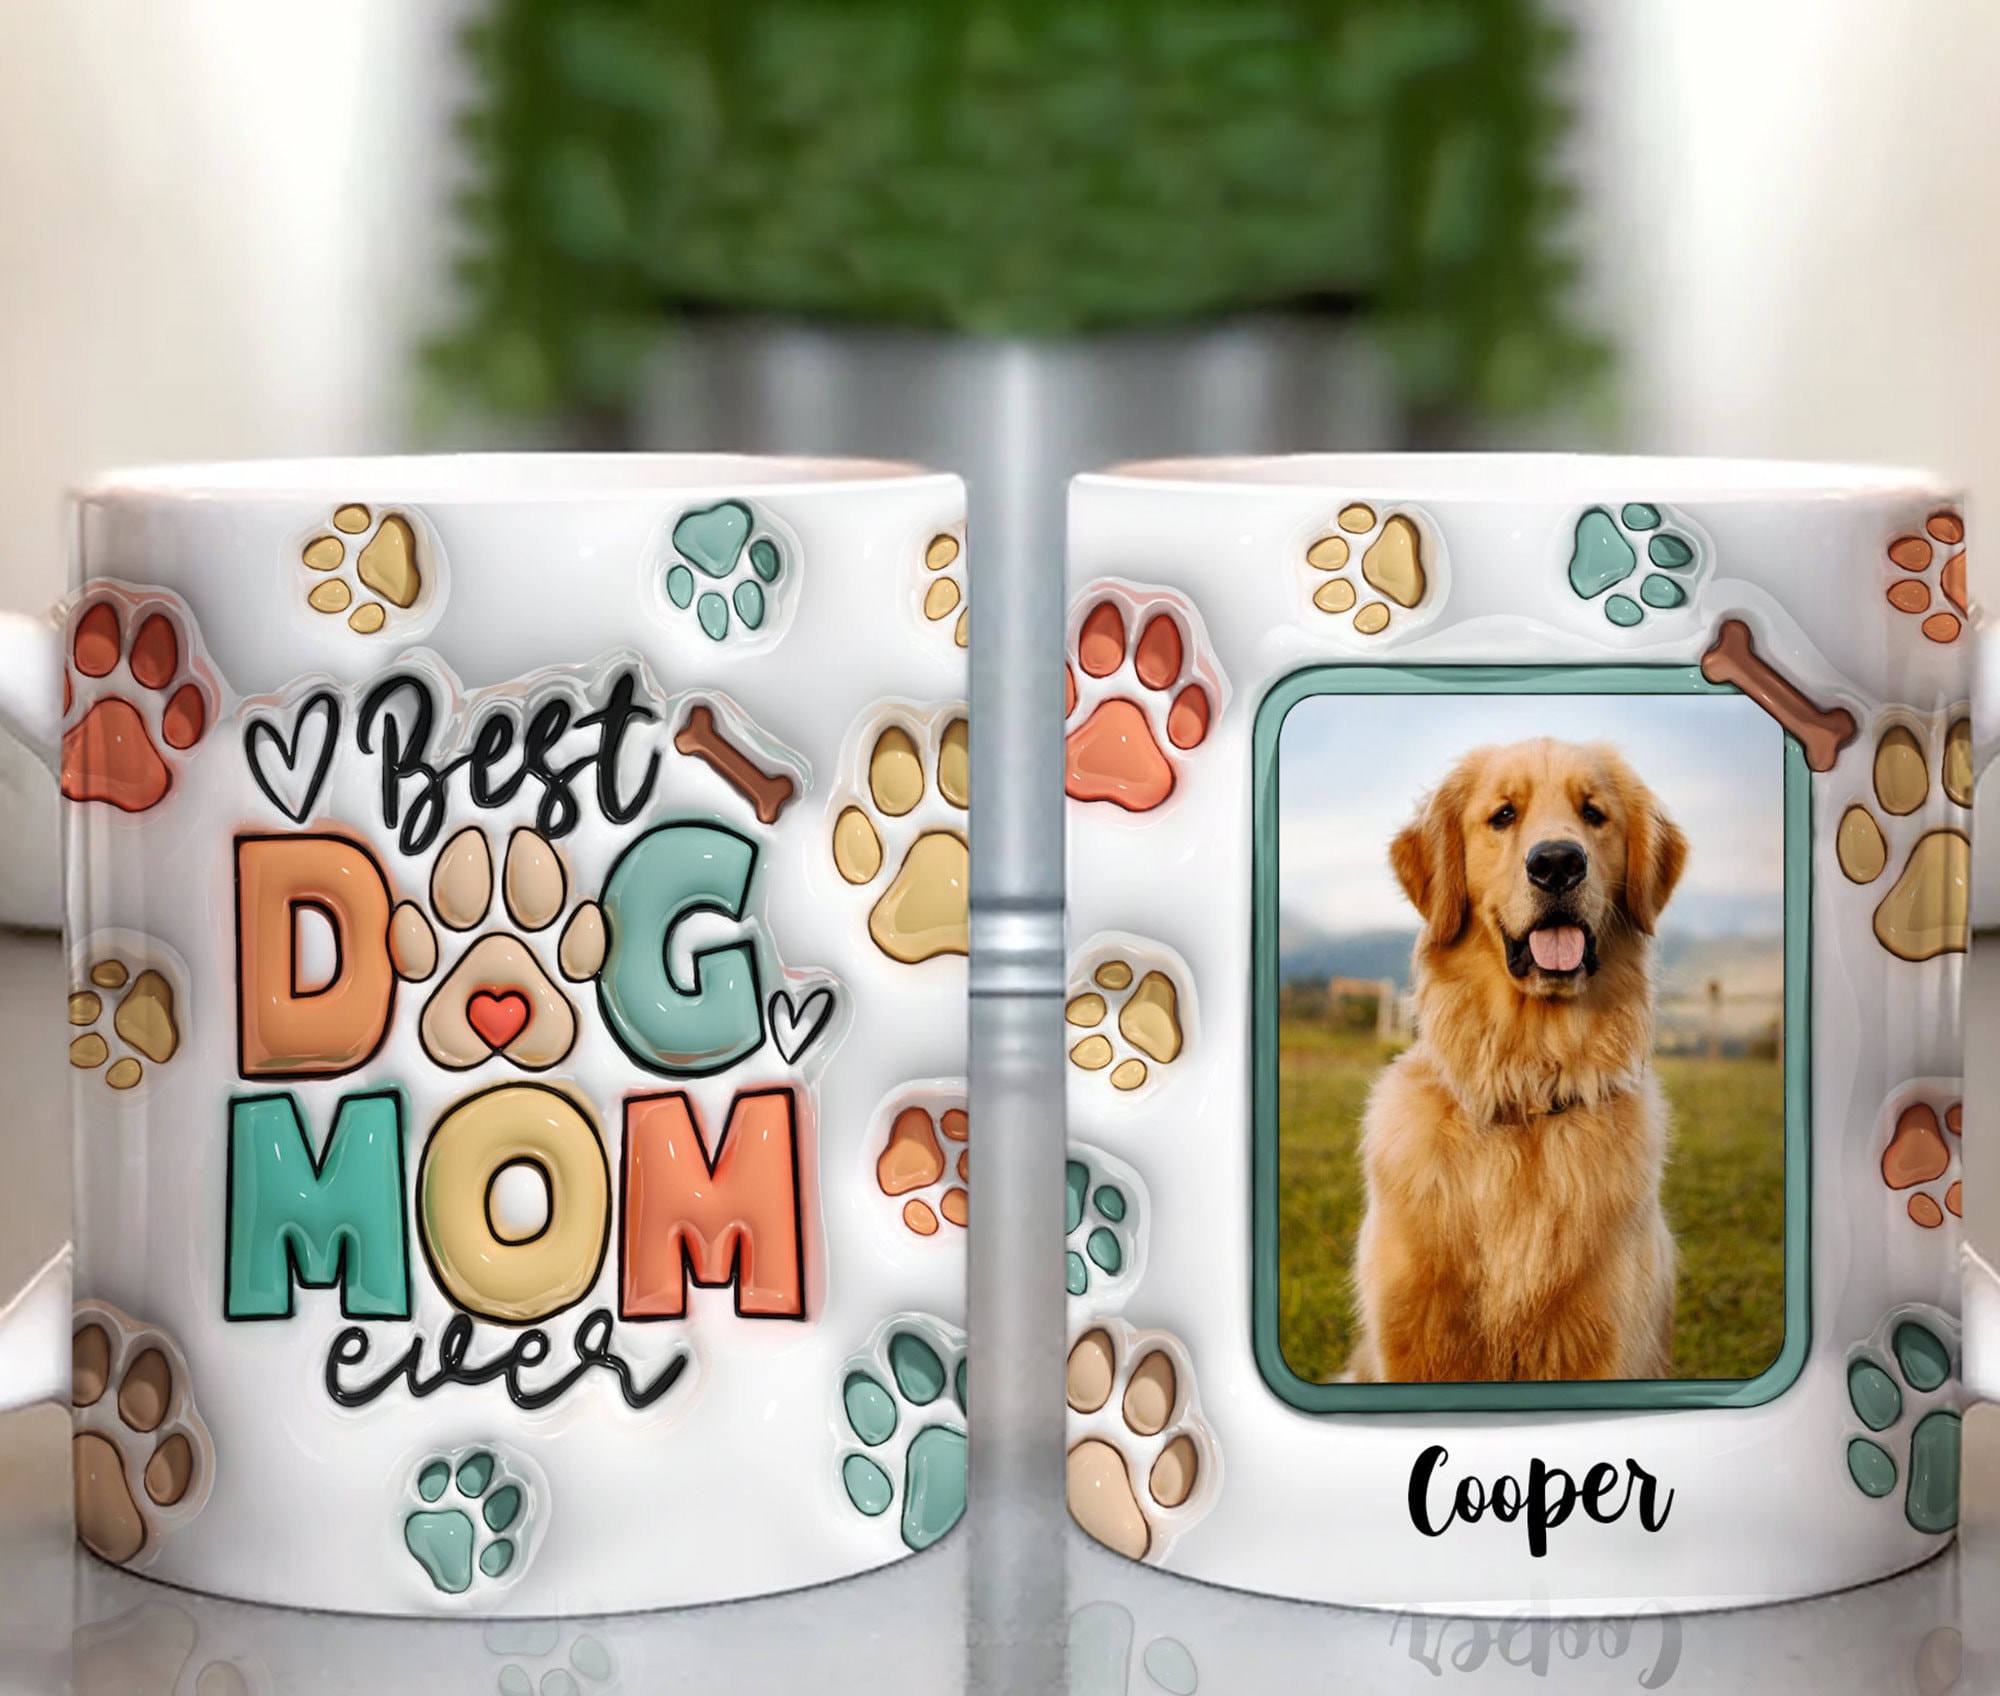 Gifts For Mom - Best Mom Ever Gifts - Mothers Day Gift From Daughter Son -  Happy Birthday Mom Gifts …See more Gifts For Mom - Best Mom Ever Gifts 